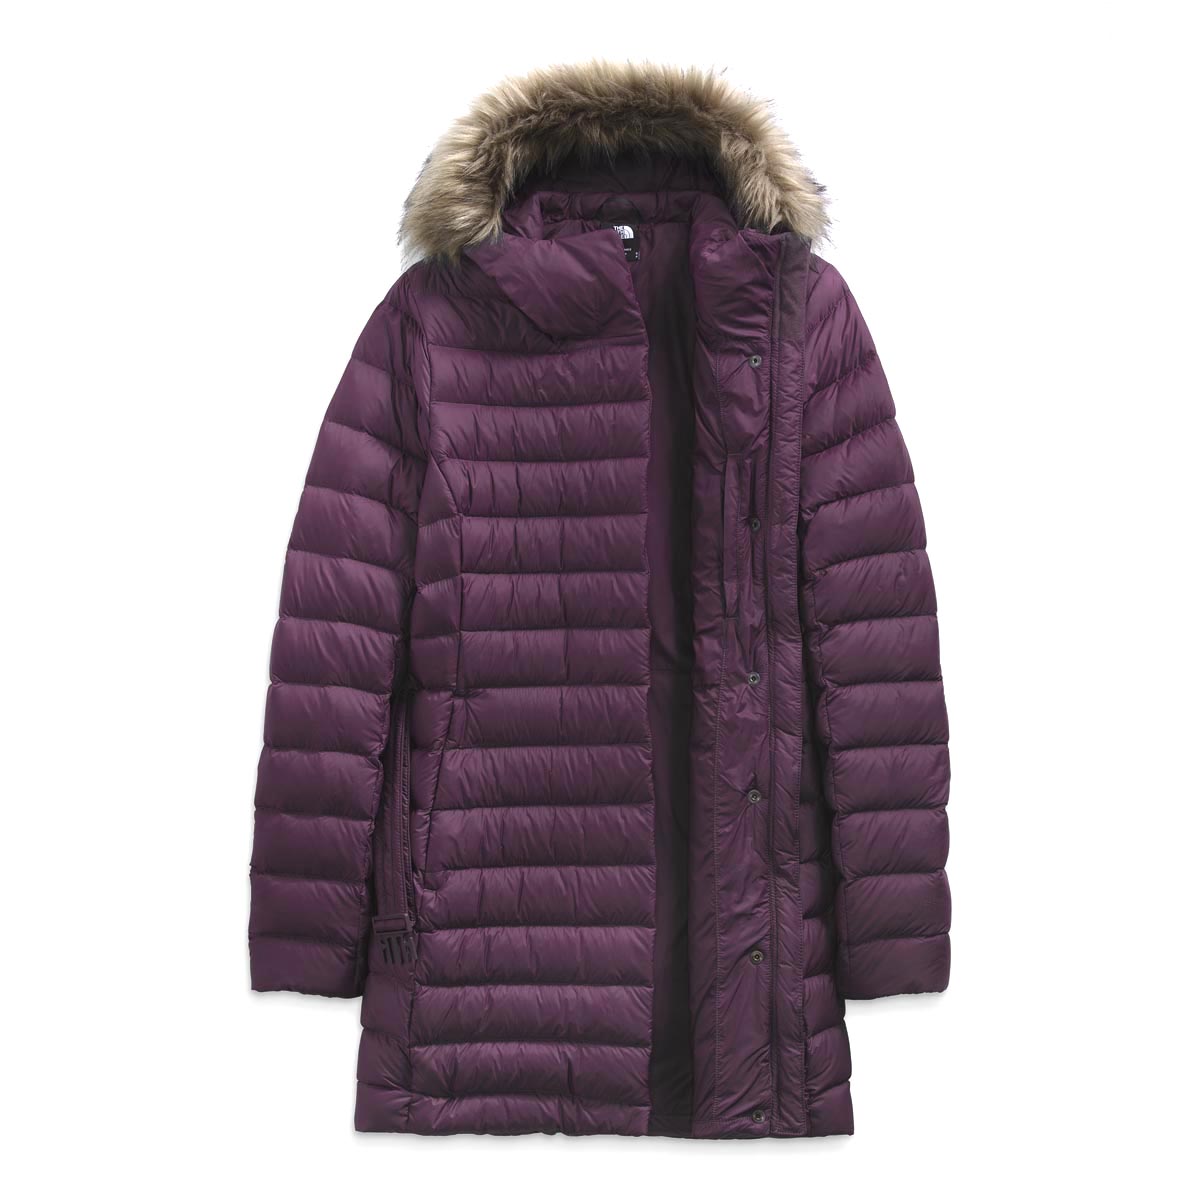 The North Face Women's Transverse Belted Parka